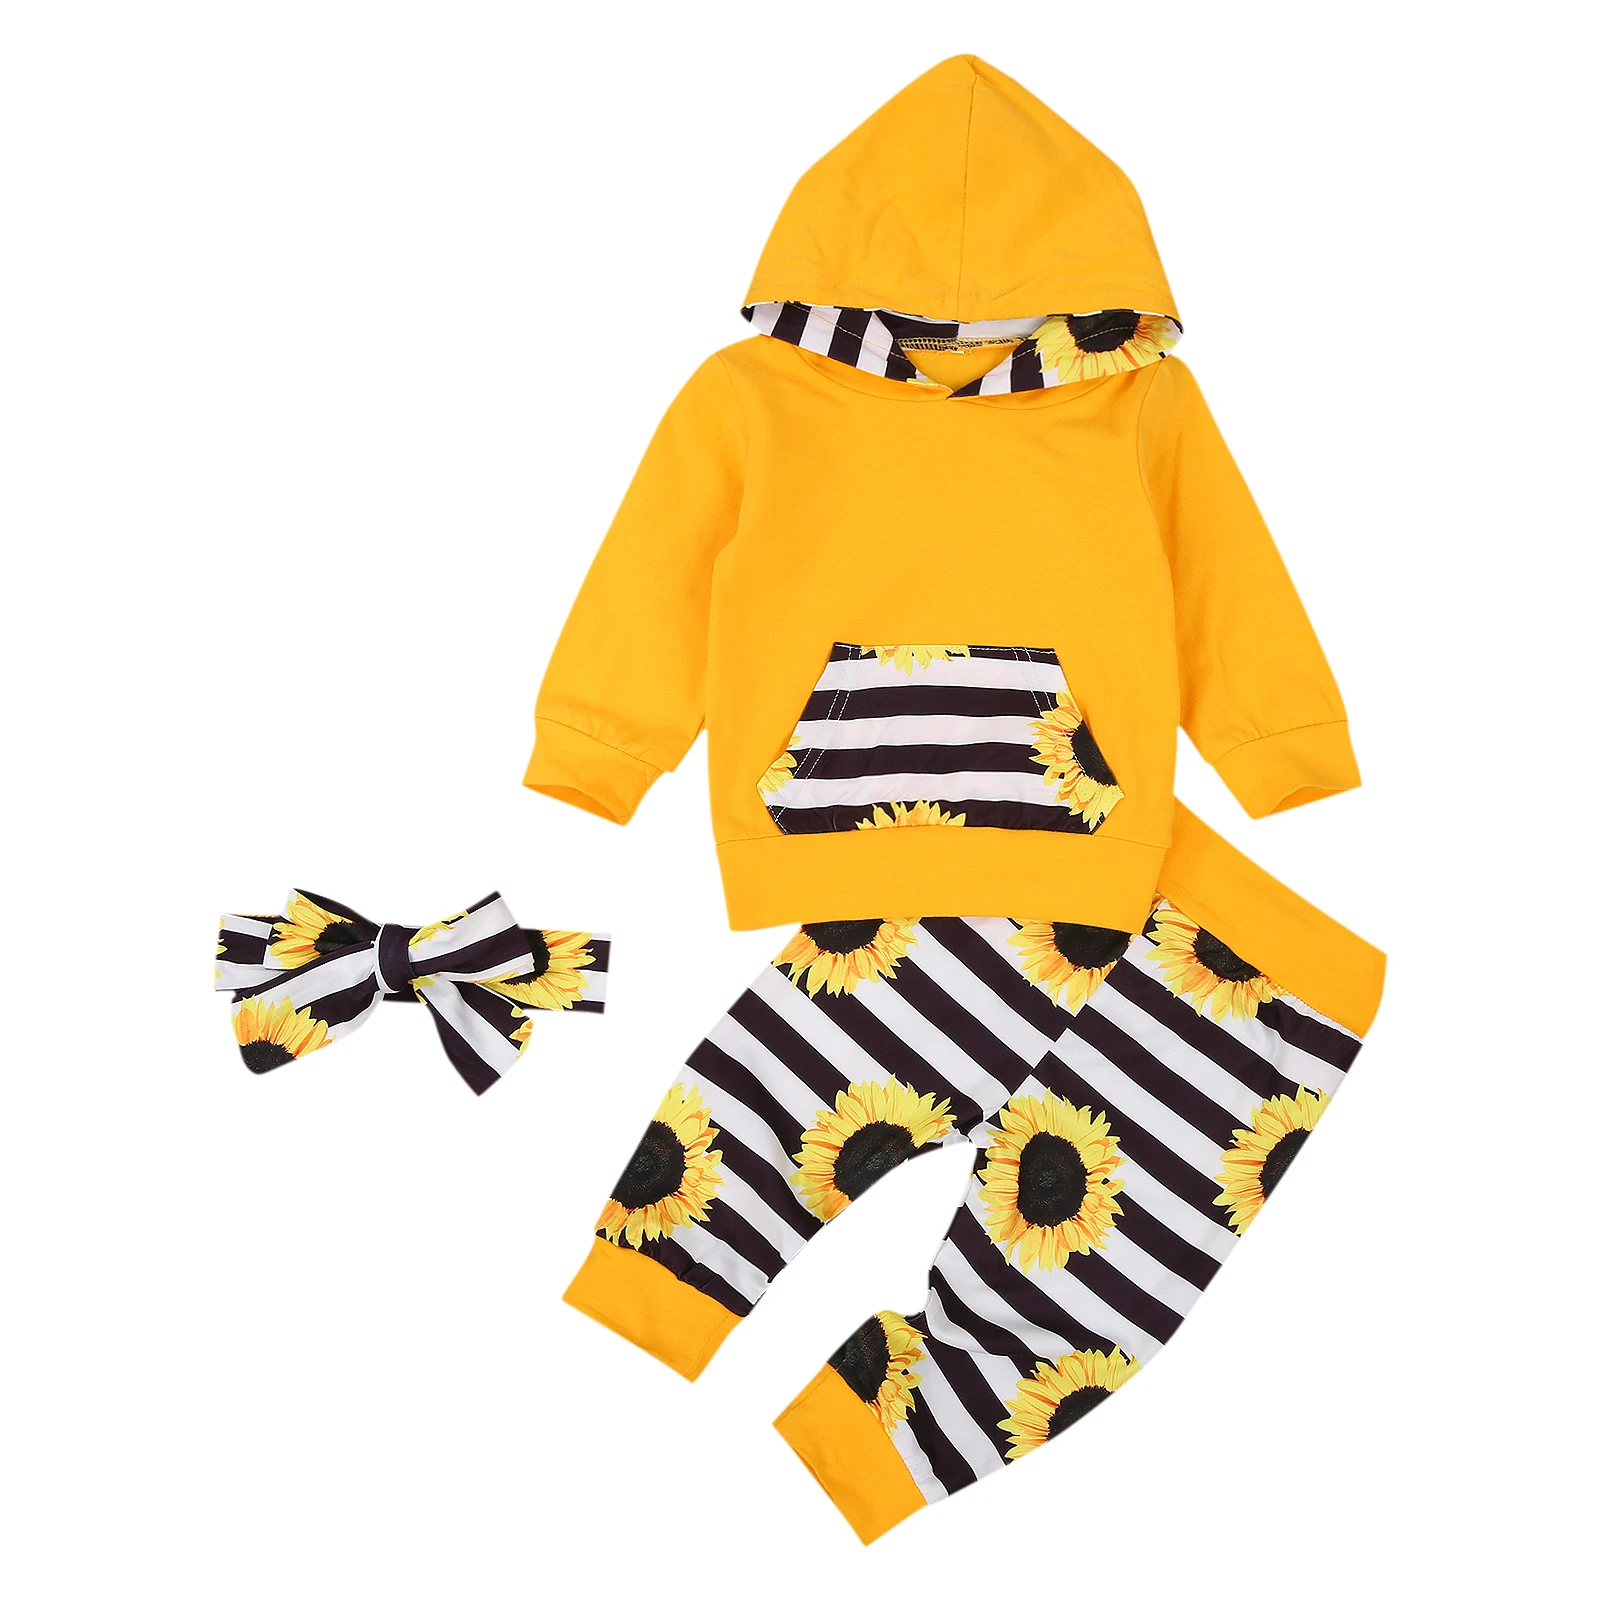 

2020 Baby Girl Fall Clothes Cute Sunflower Stripes Print Long Sleeve Top+Pants+Headband 3Pcs Outfits Set 3-24M